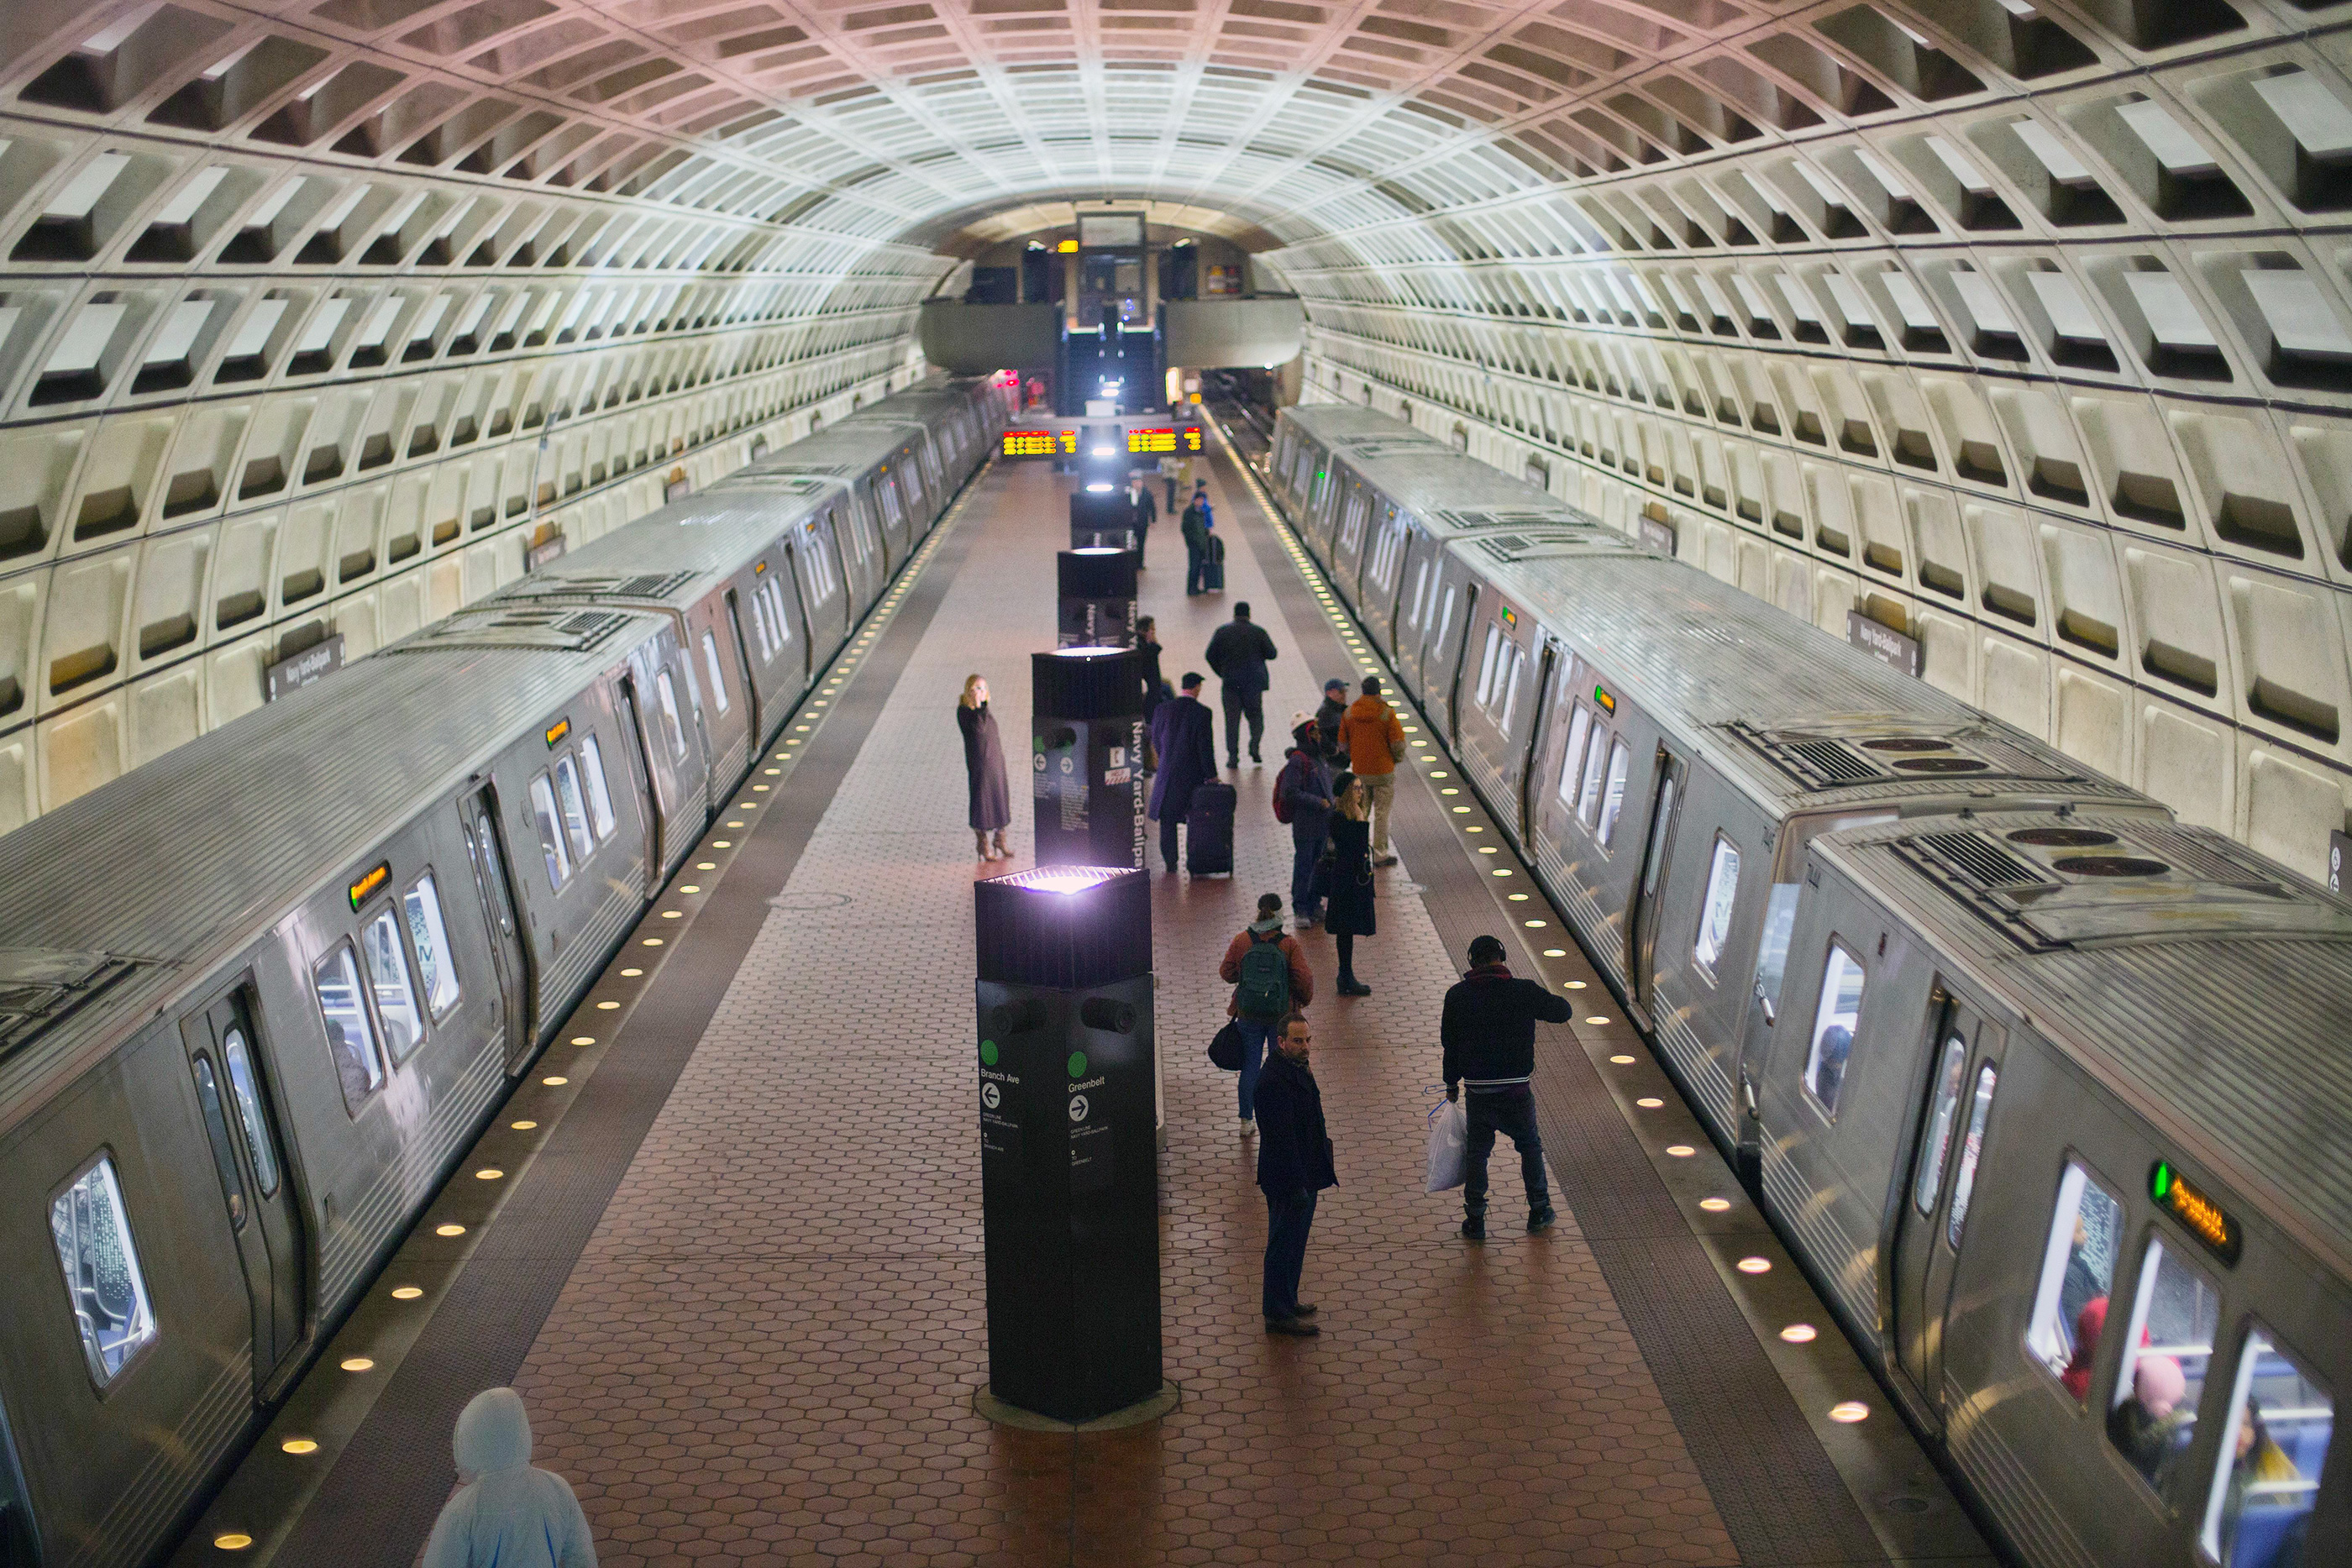 Passengers board subway trains at the Naval Yard-Ballpark Metro Station, part of the public transit network for Washington DC, February 8, 2018.